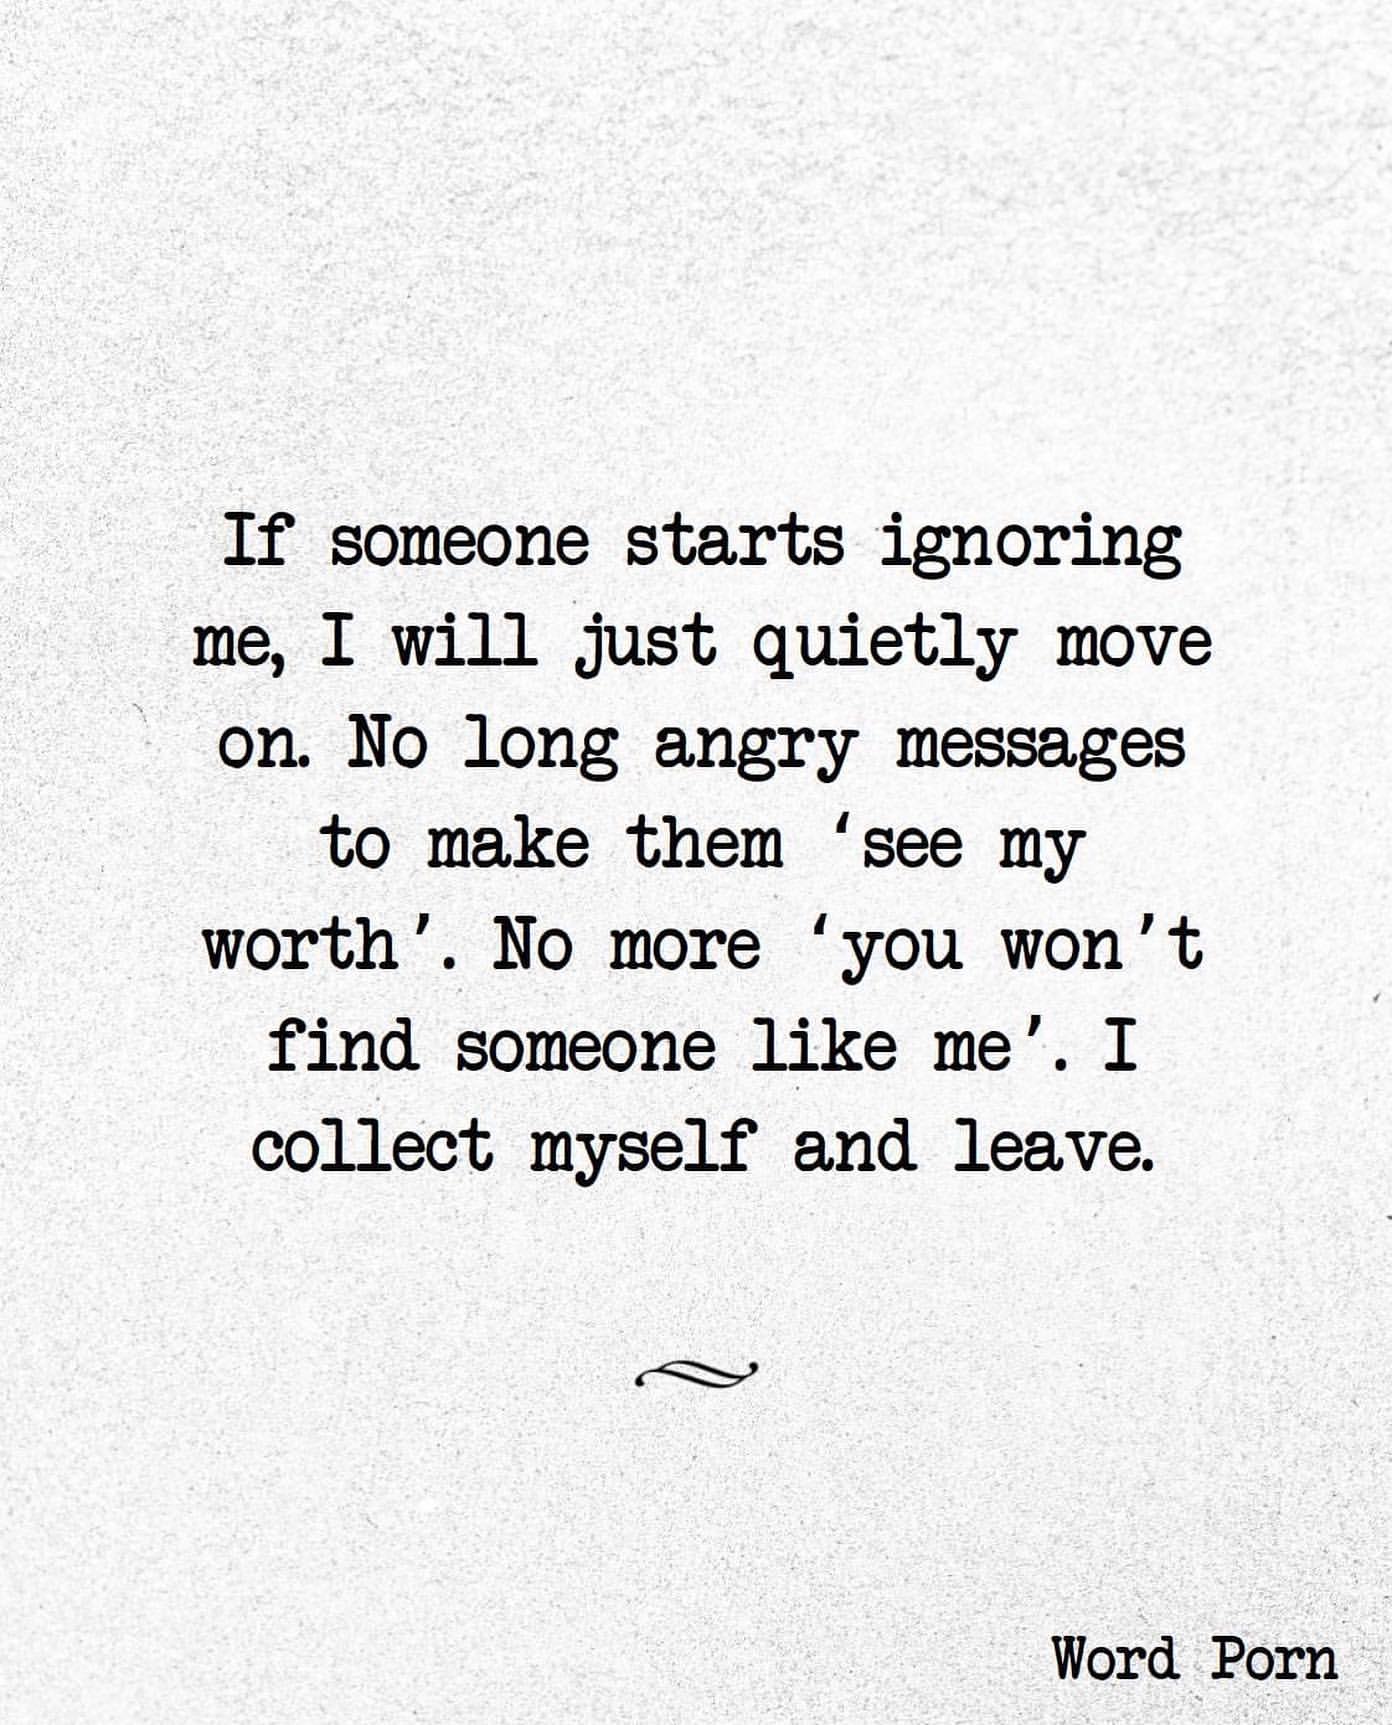 If someone starts ignoring me, I will just quietly move on. No long angry messages to make them 'see my worth' No more 'you won't find someone like me'. I collect myself and leave.